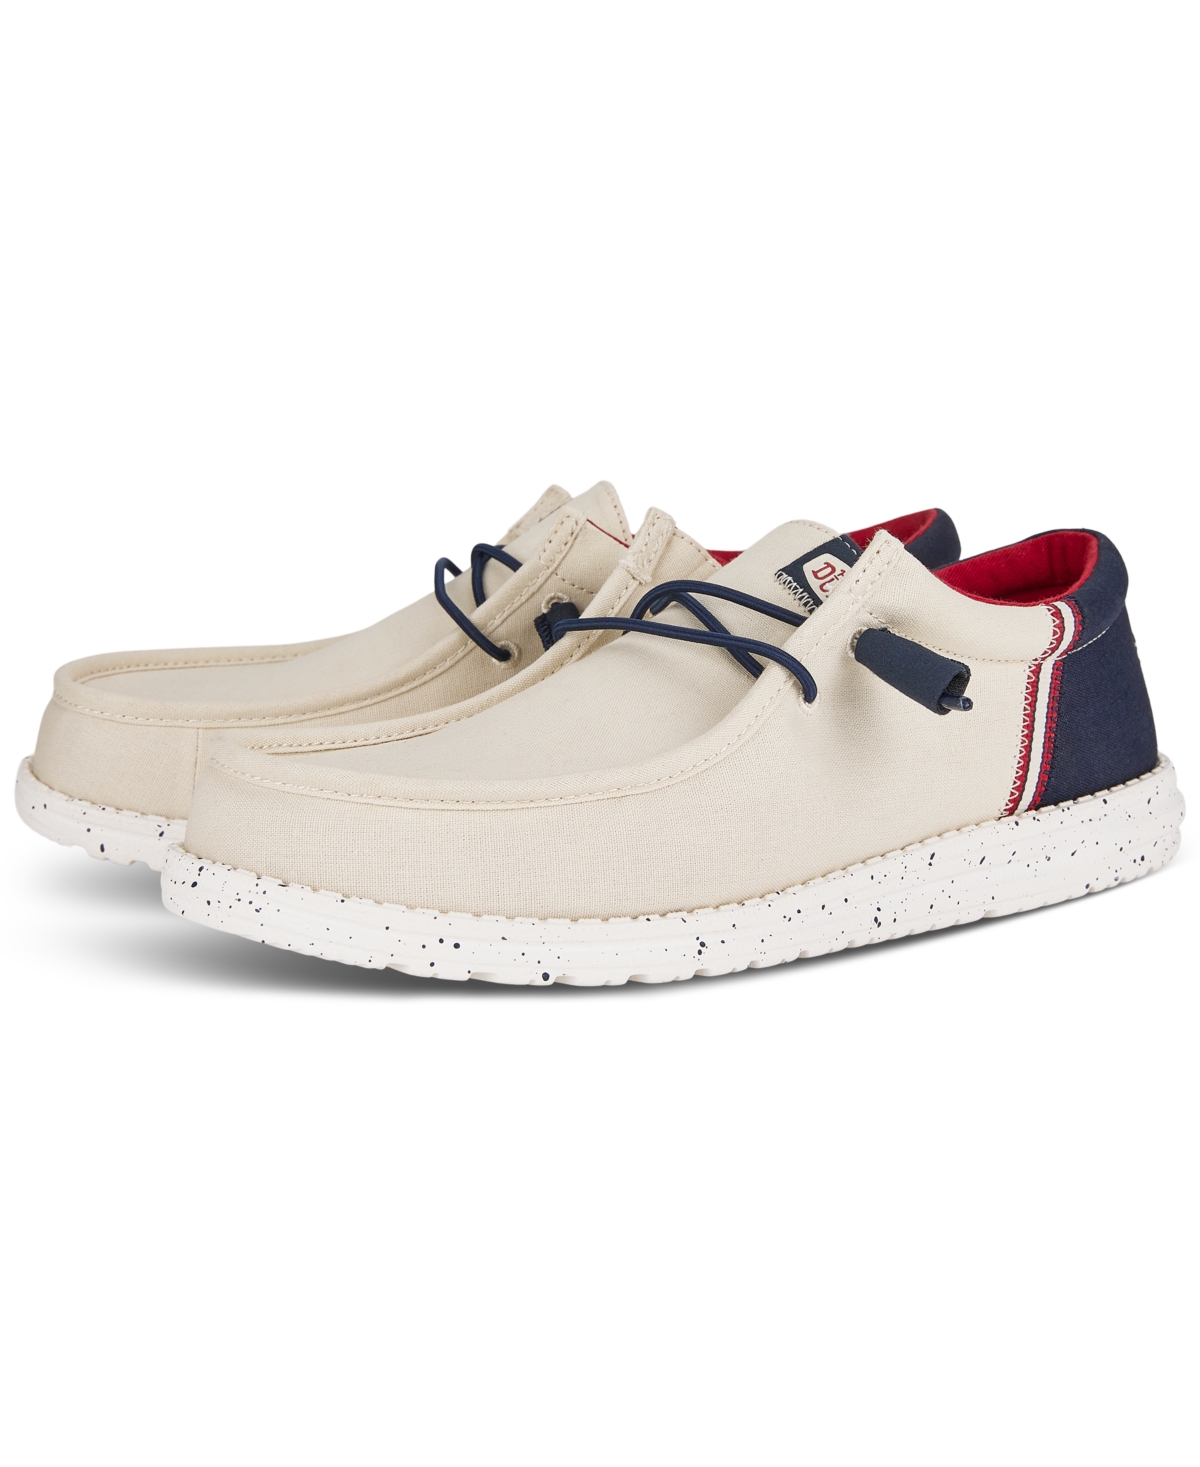 Shop Hey Dude Men's Wally Funk Americana Casual Moccasin Sneakers From Finish Line In Off White,navy,red